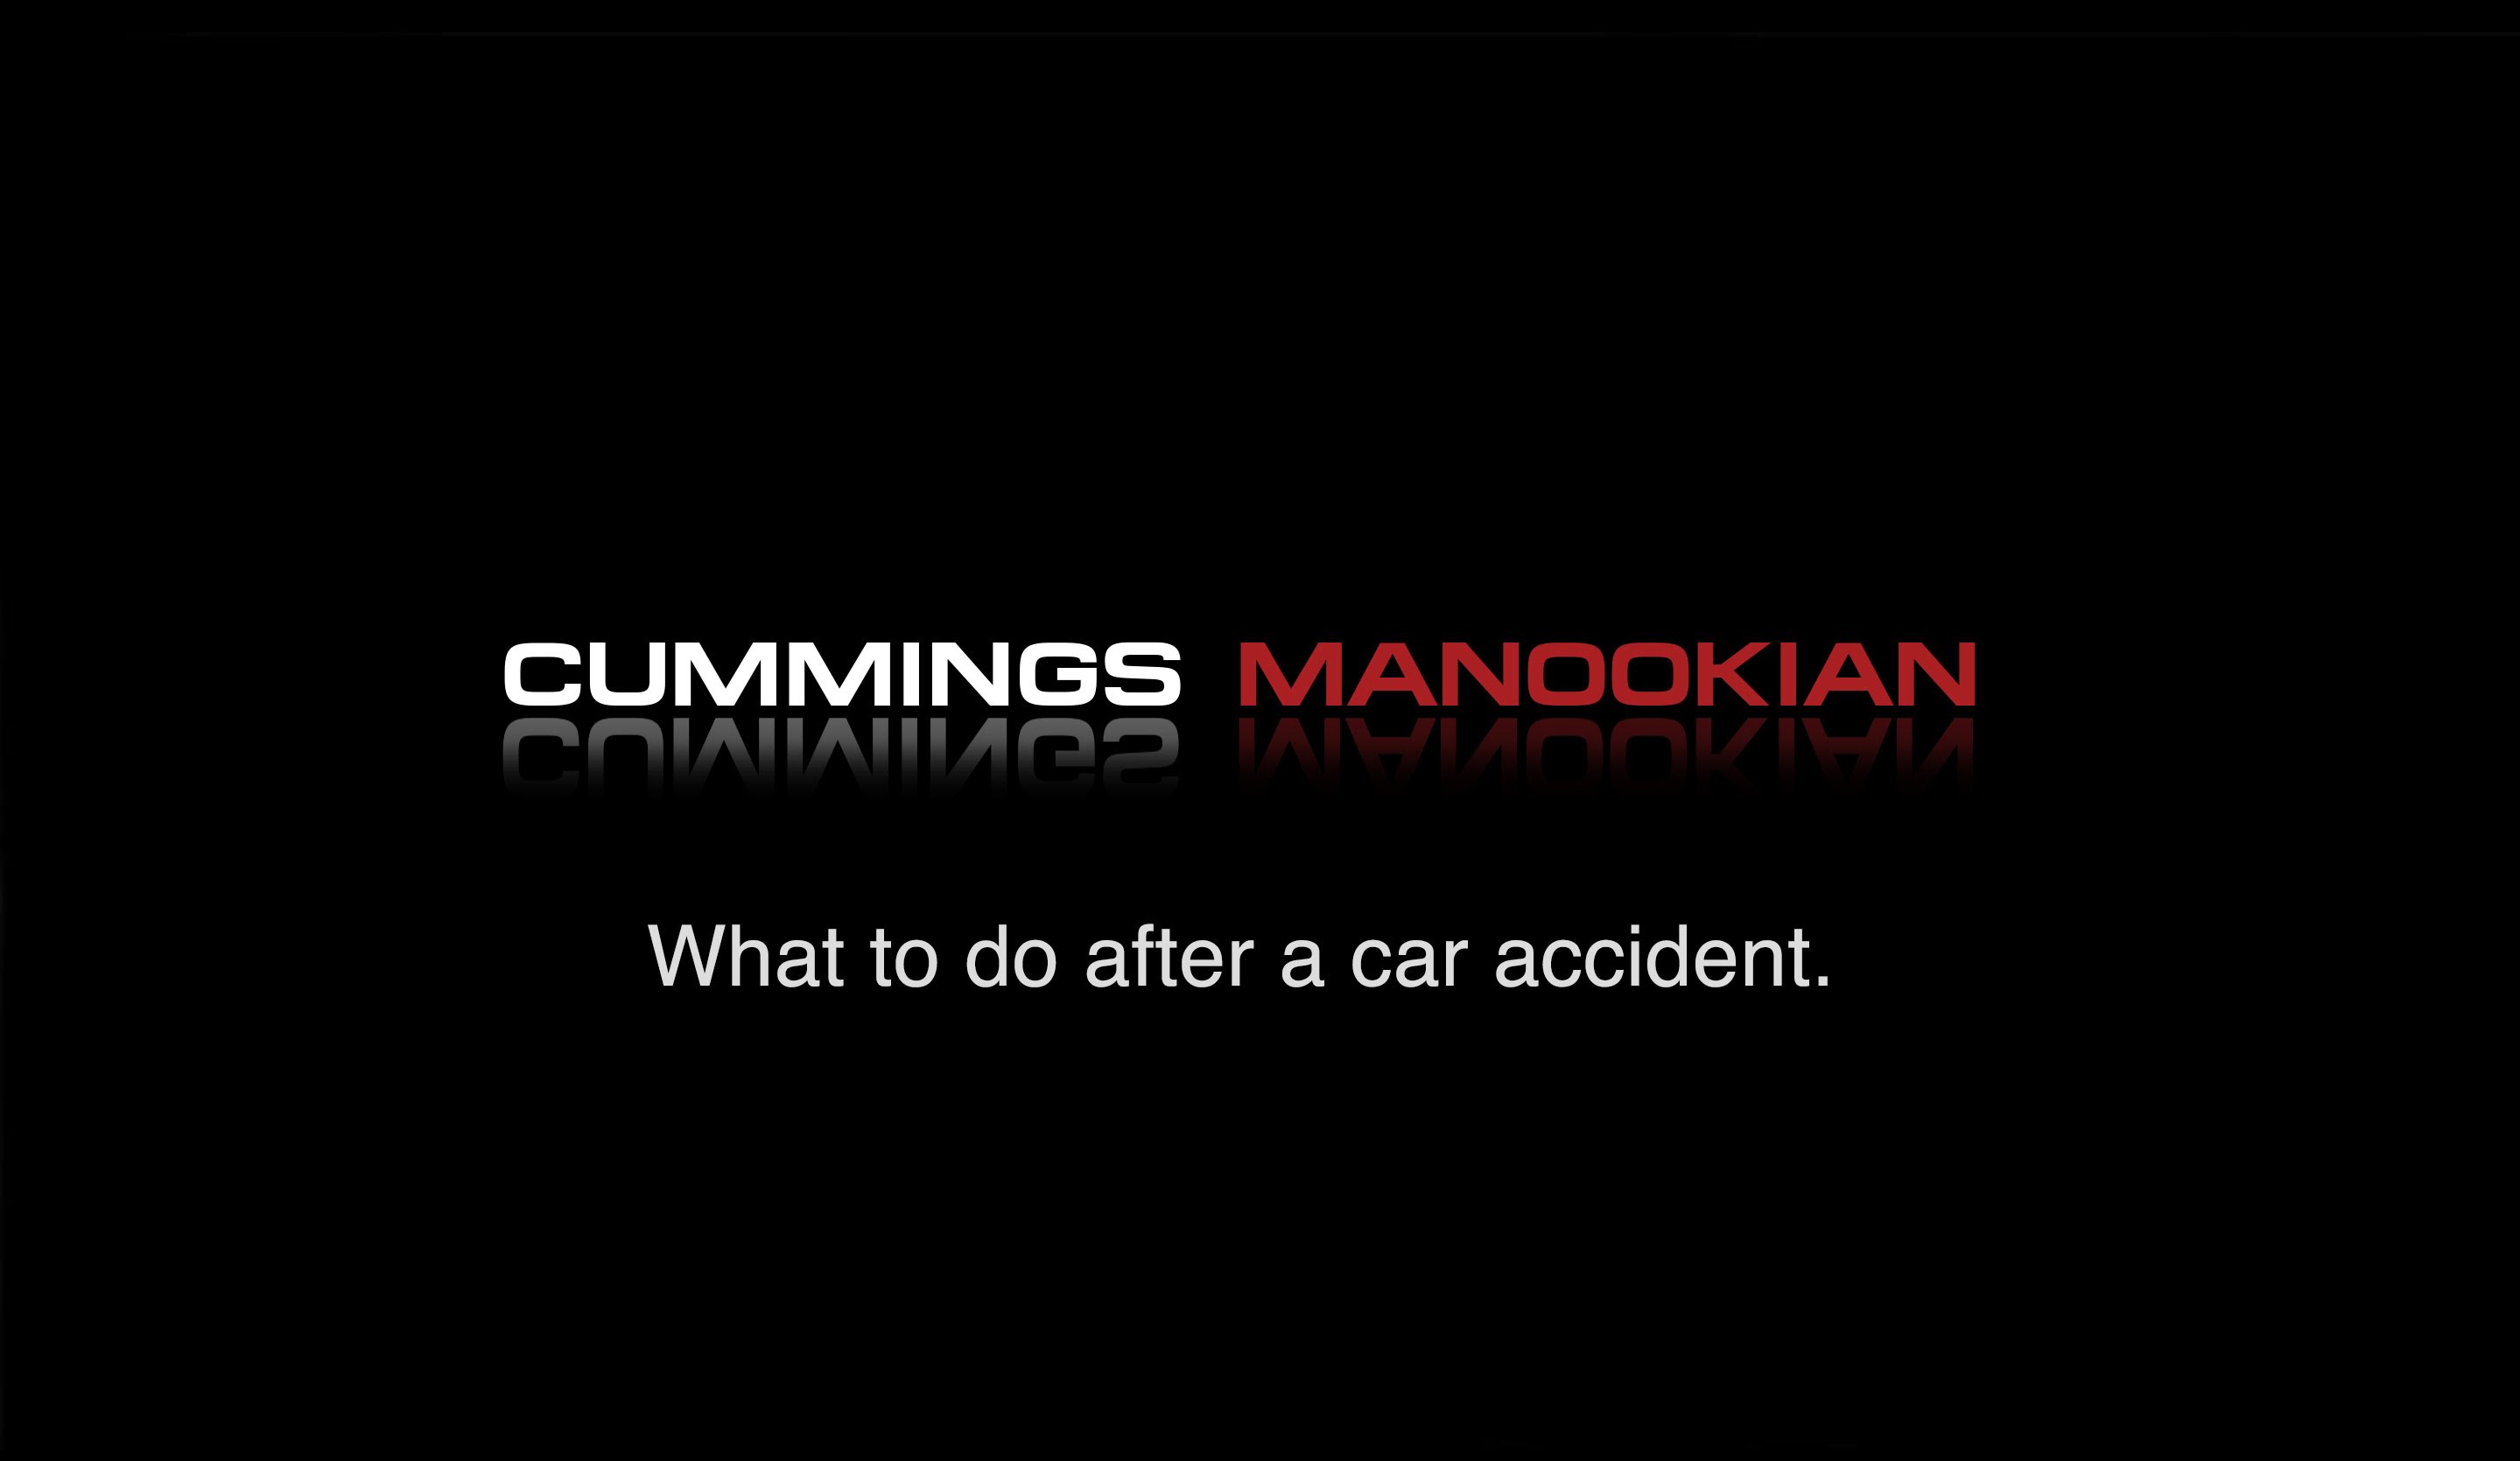 Top Car Accident Lawyer Offers Tips to Car Wreck Victims - Cummings Manookian Trial Lawyers